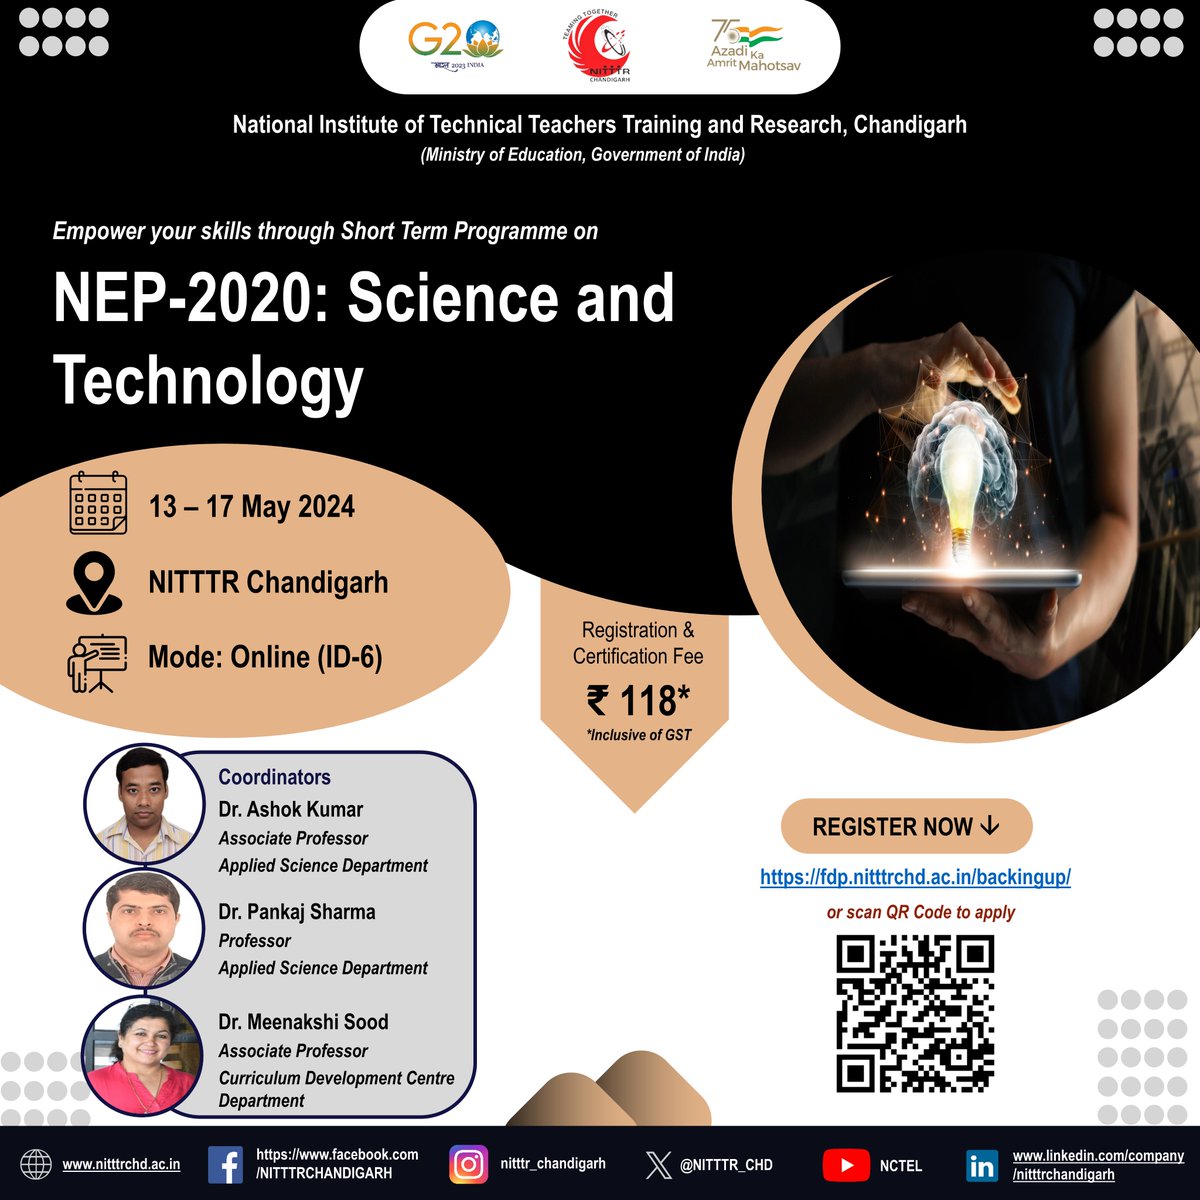 Join us for a 1 Week course on NEP-2020: Science and Technology to be organized by the Applied Science Dept. from 13-17 May'24. Interested faculty & staff members may to apply at fdp.nitttrchd.ac.in/backingup/ #nitttrchd #NEP2020 #STEMEducation #EducationPolicy #ScienceandTechnology